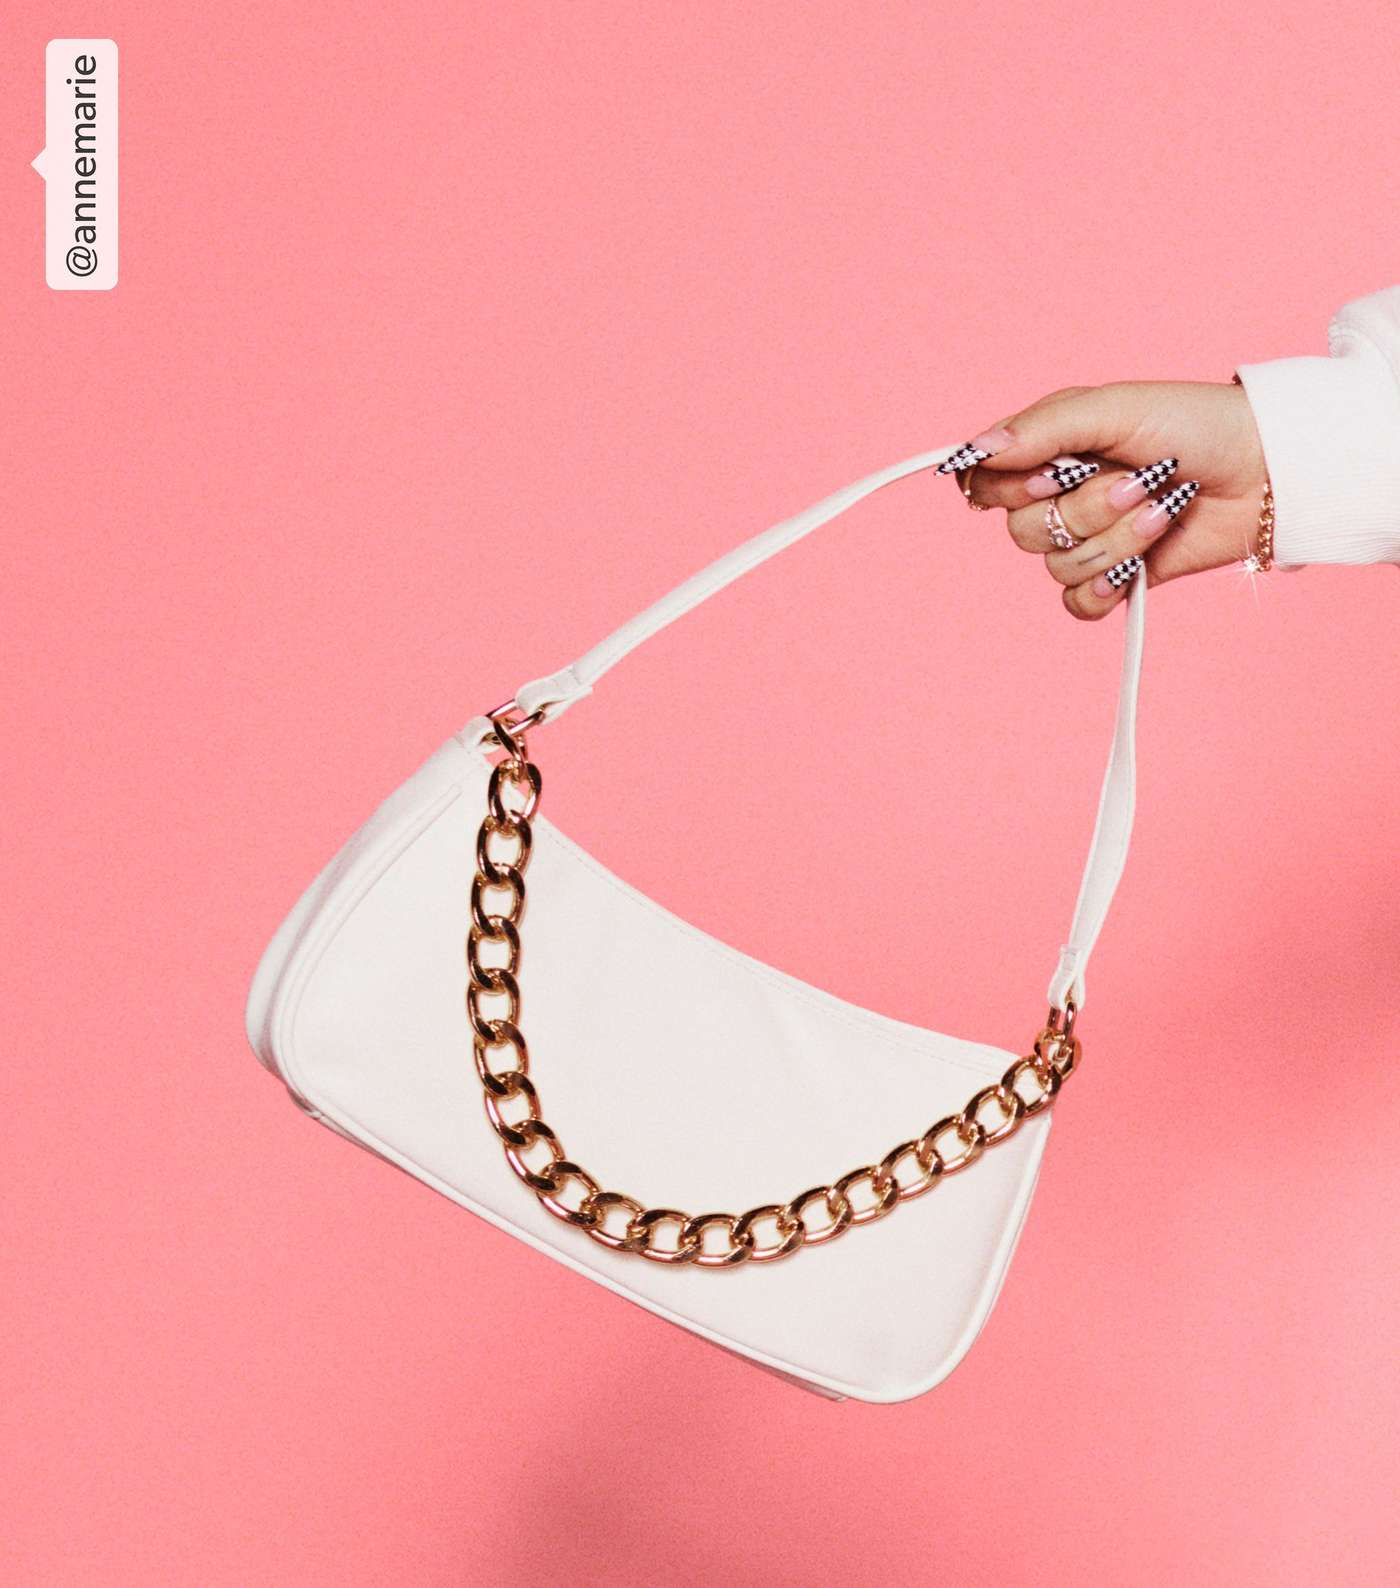 Perfect Therapy Cream Leather-Look Chain Shoulder Bag